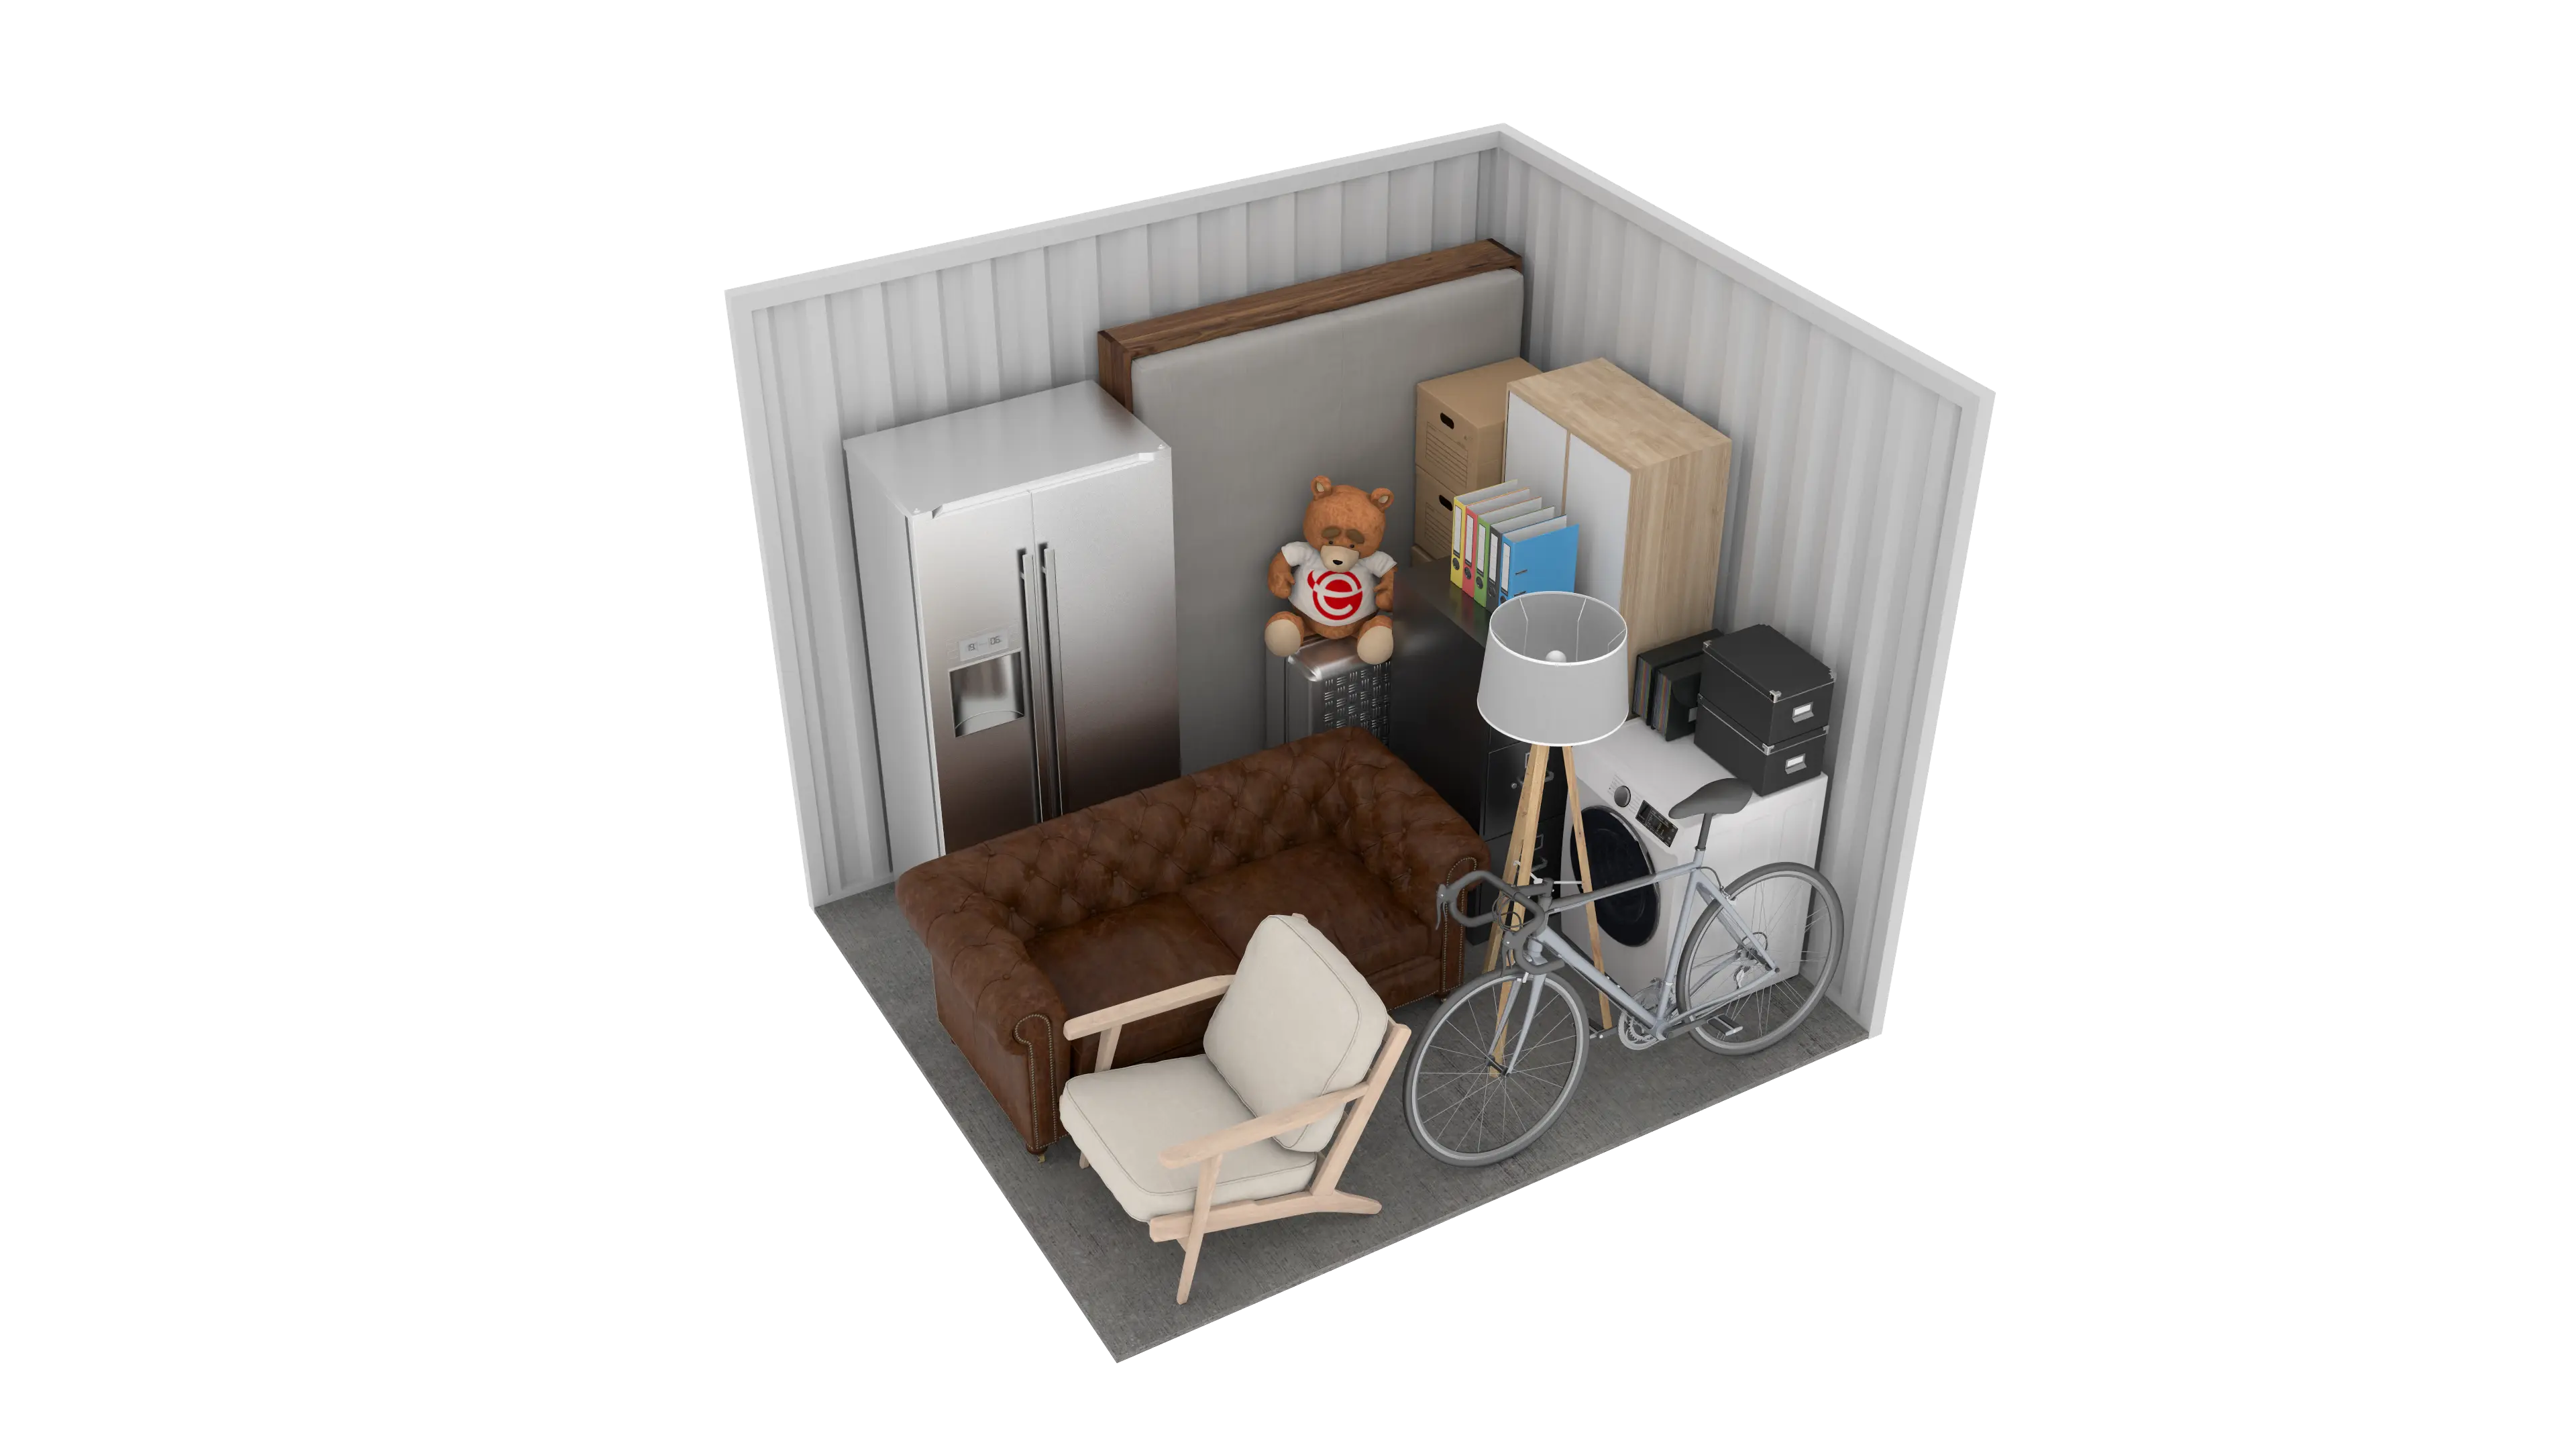 Isometric still of a storage unit with a size of 75 sqft